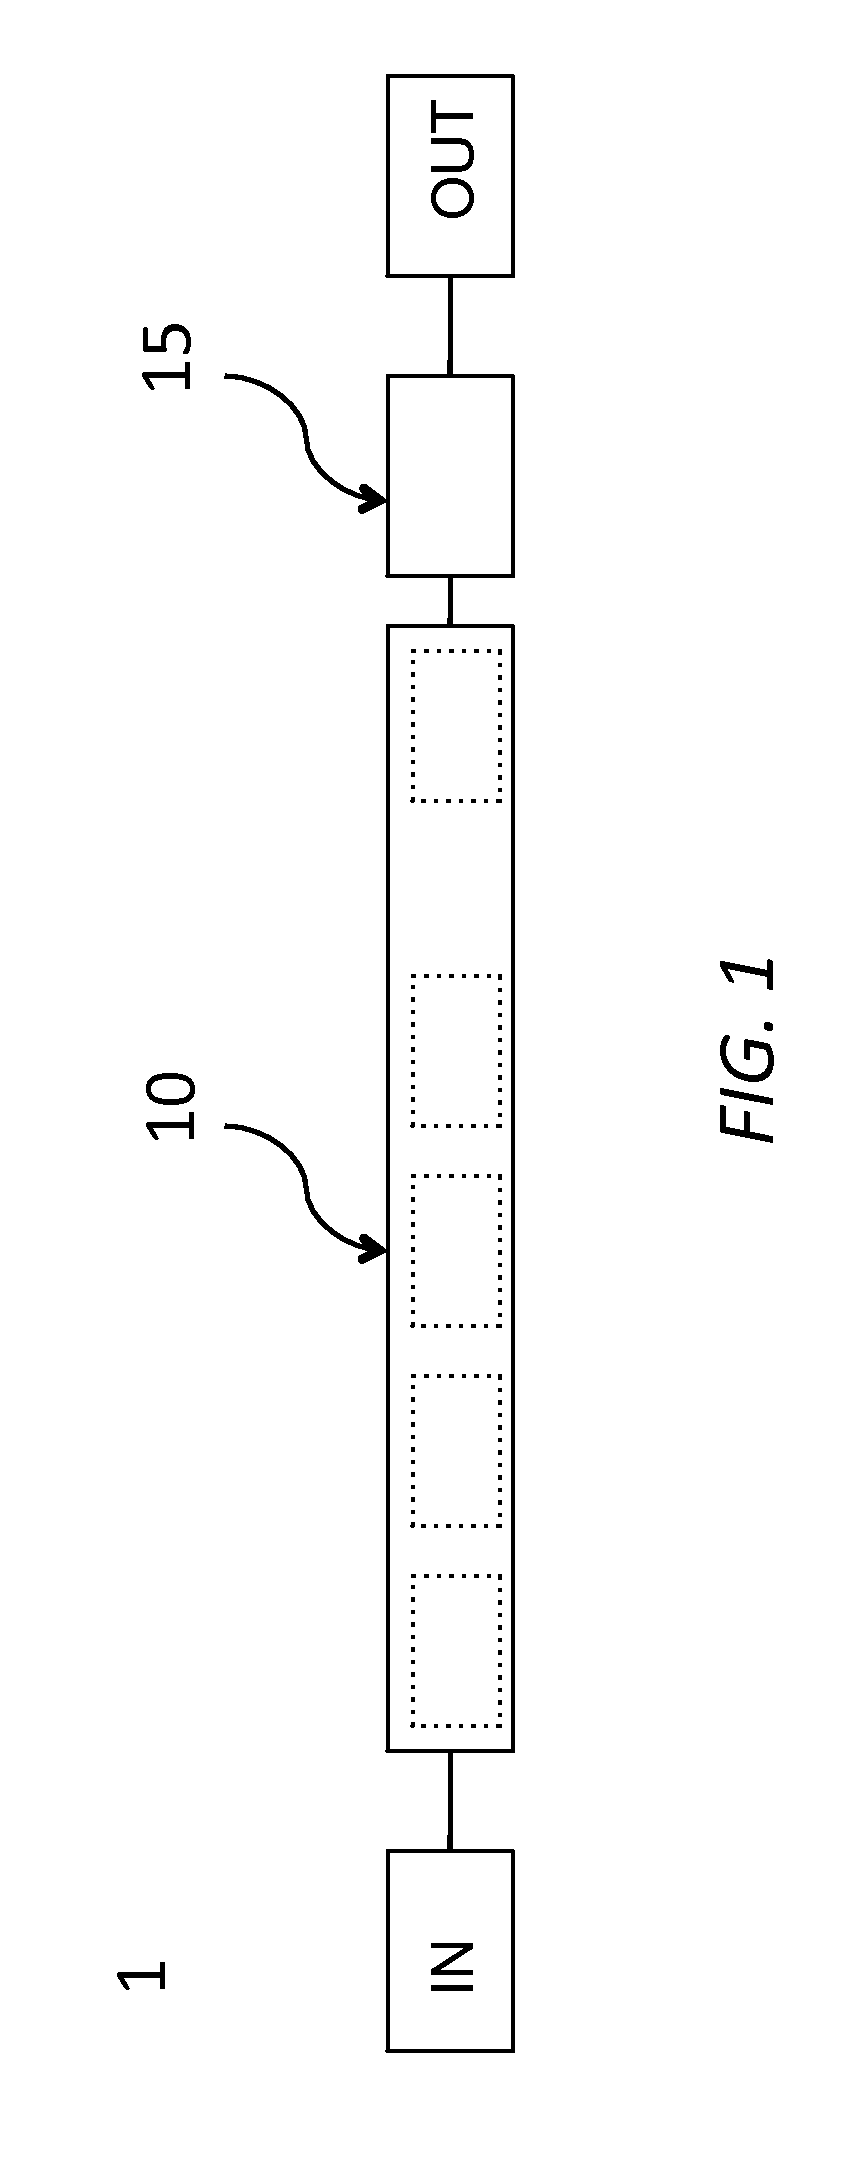 Flat-top tunable filter